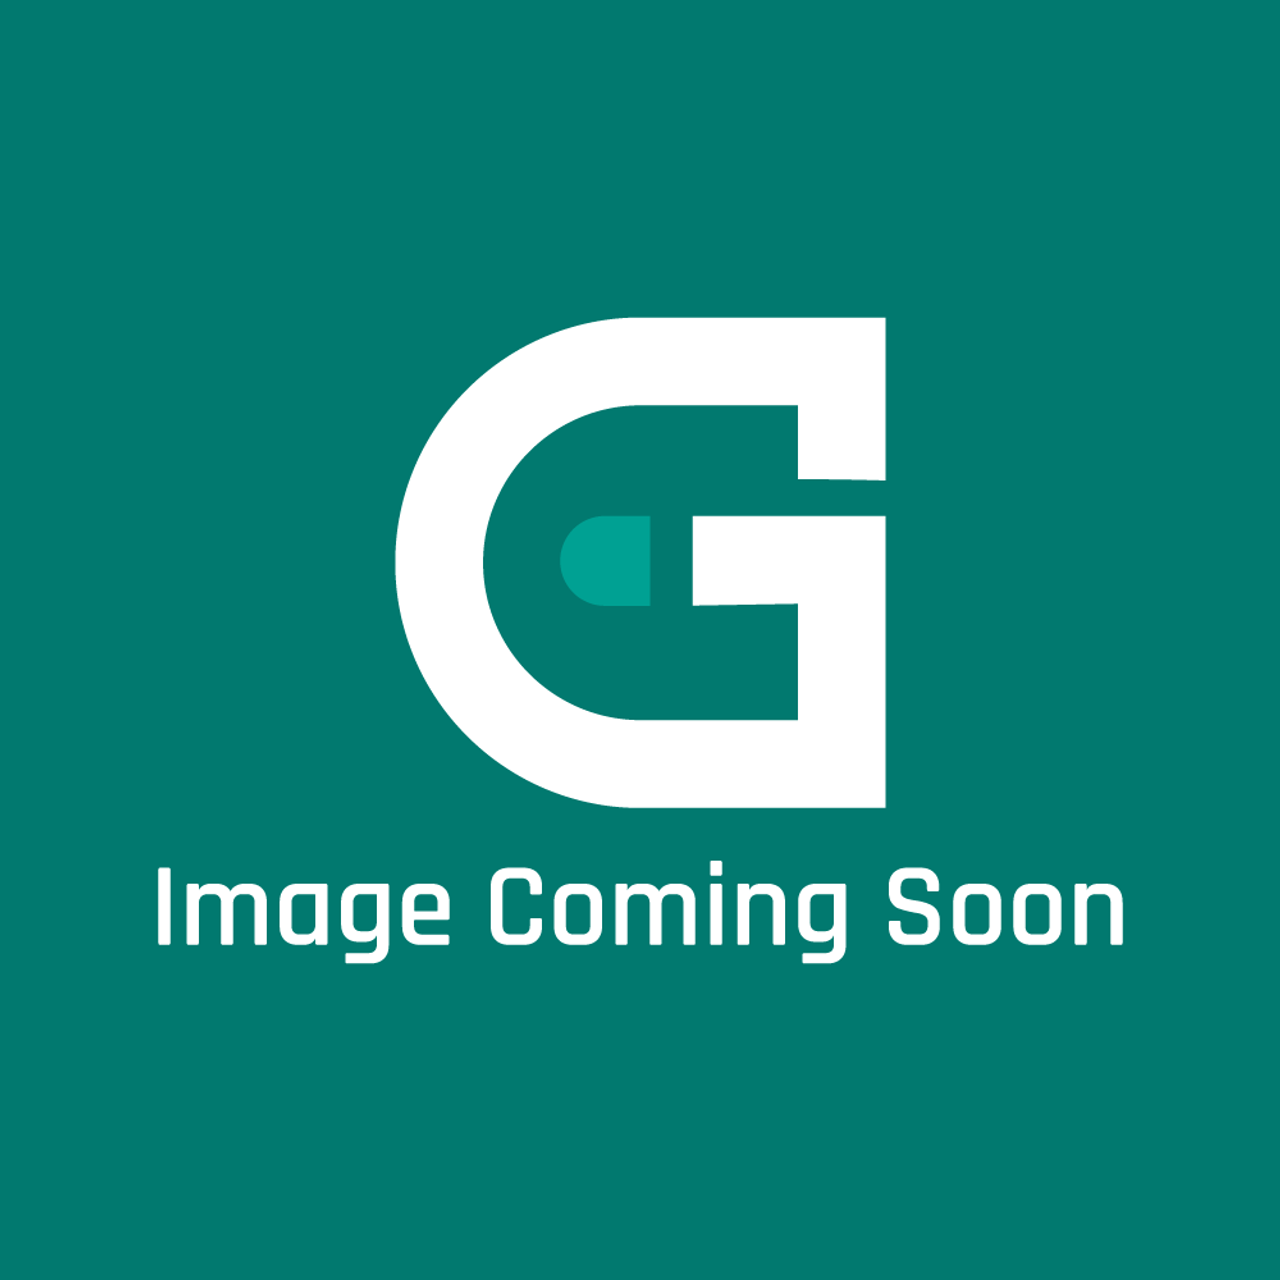 AGA Marvel 90-54091-70 - A/C-H&T Main Hf 24 - 6-Month Lead Time - Image Coming Soon!